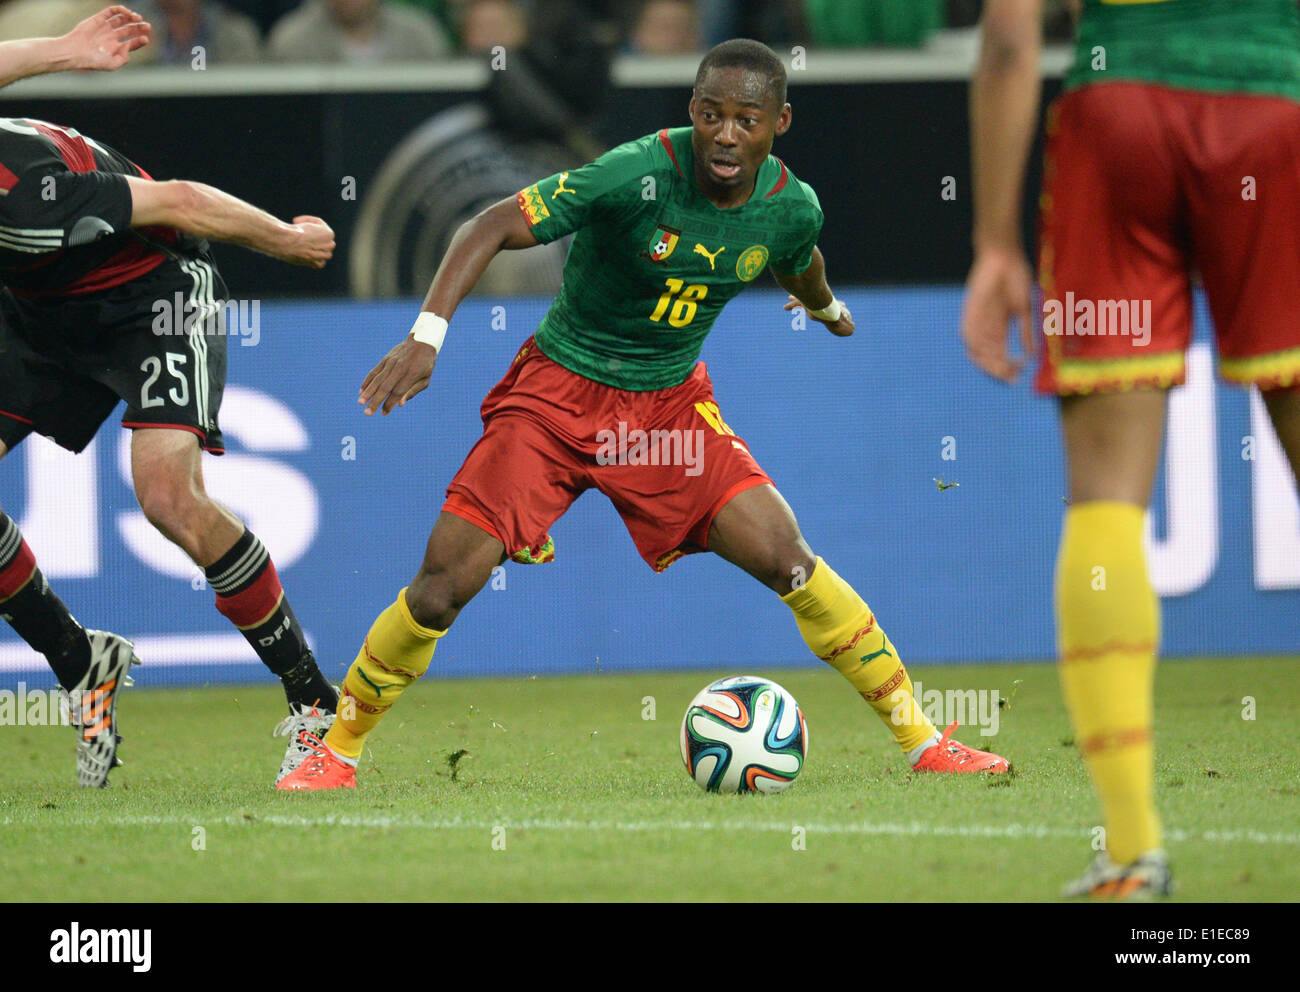 Moenchengladbach, Germany. 01st June, 2014. Cameroon's Enoh Eyong in action during the friendly soccer match between Germany and Cameroon at the Borussia Park stadium in Moenchengladbach, Germany, 01 June 2014. Photo: Bernd Thissen/dpa/Alamy Live News Stock Photo